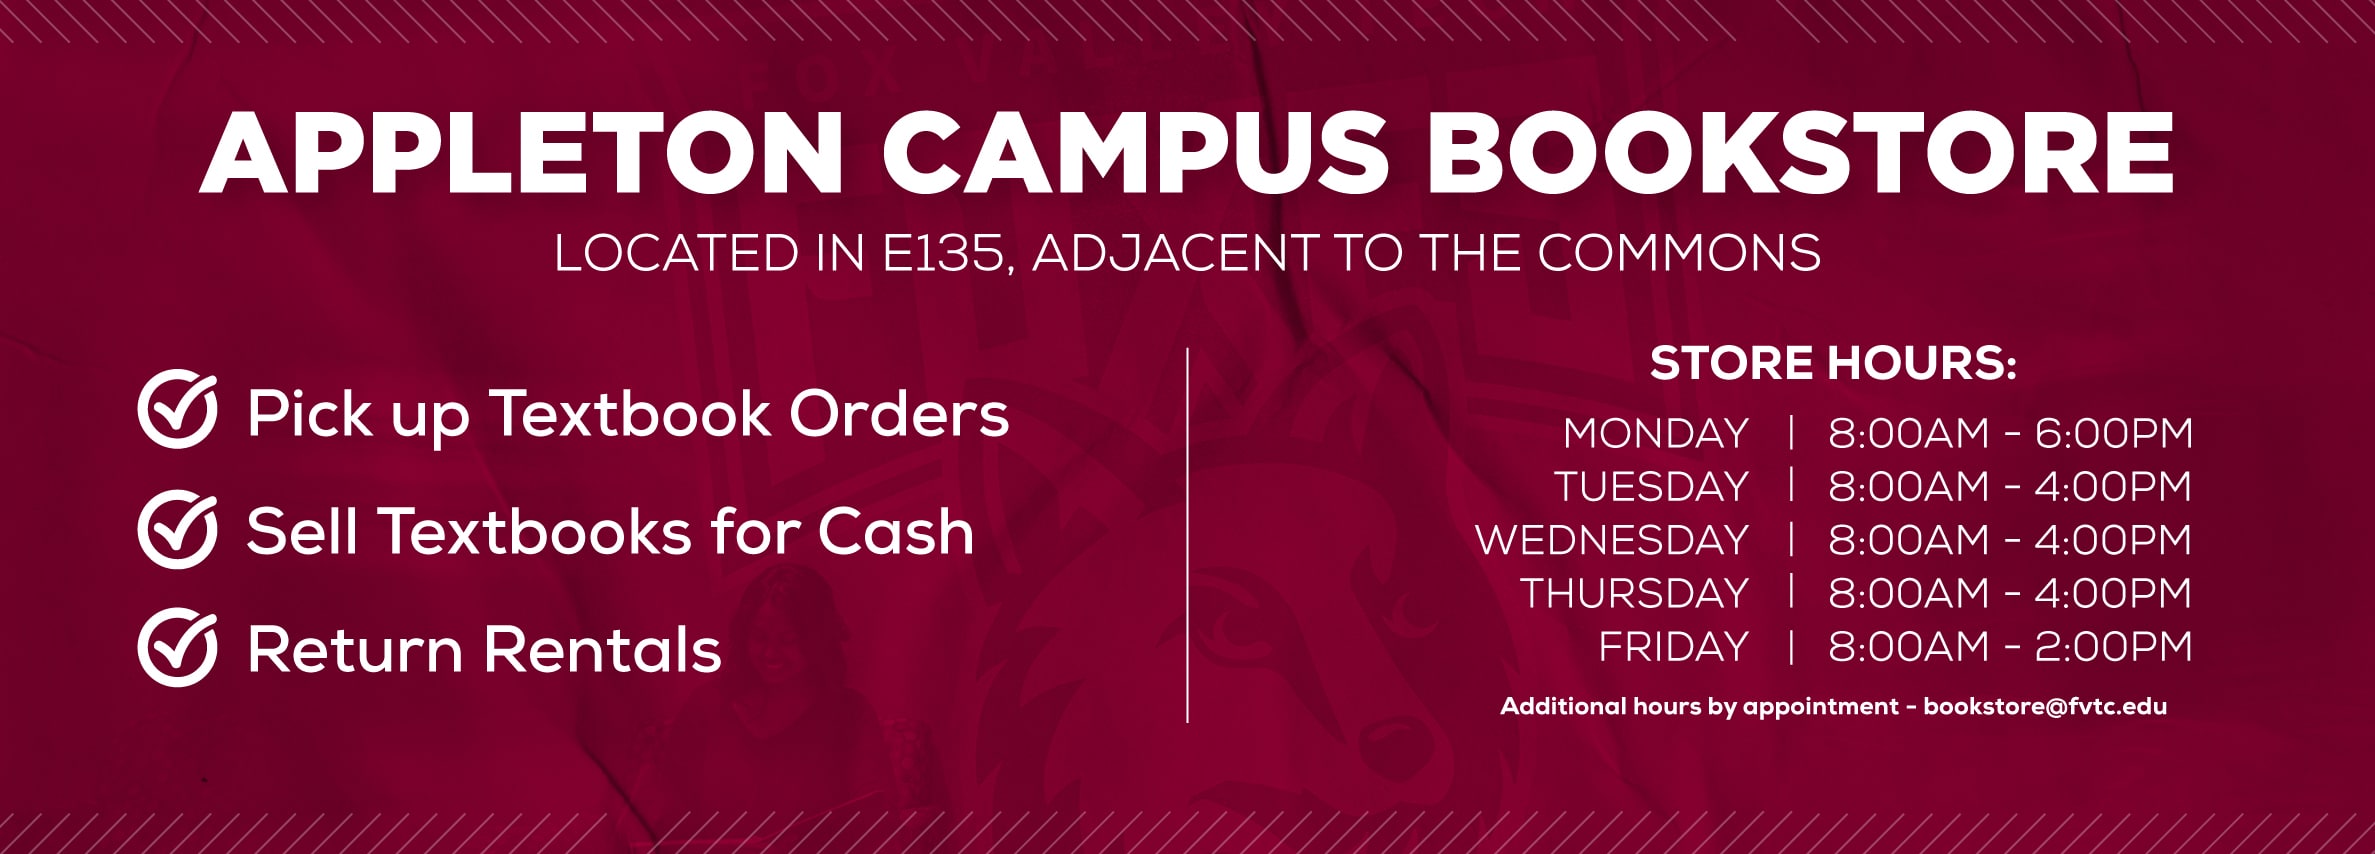 Appleton Campus Bookstore.Located in E135, adjacent to the Commons.  Summer Hours: Mon 8AM-6PM, Tue-Thu 8AM-4PM, Fri 8AM-2PM.